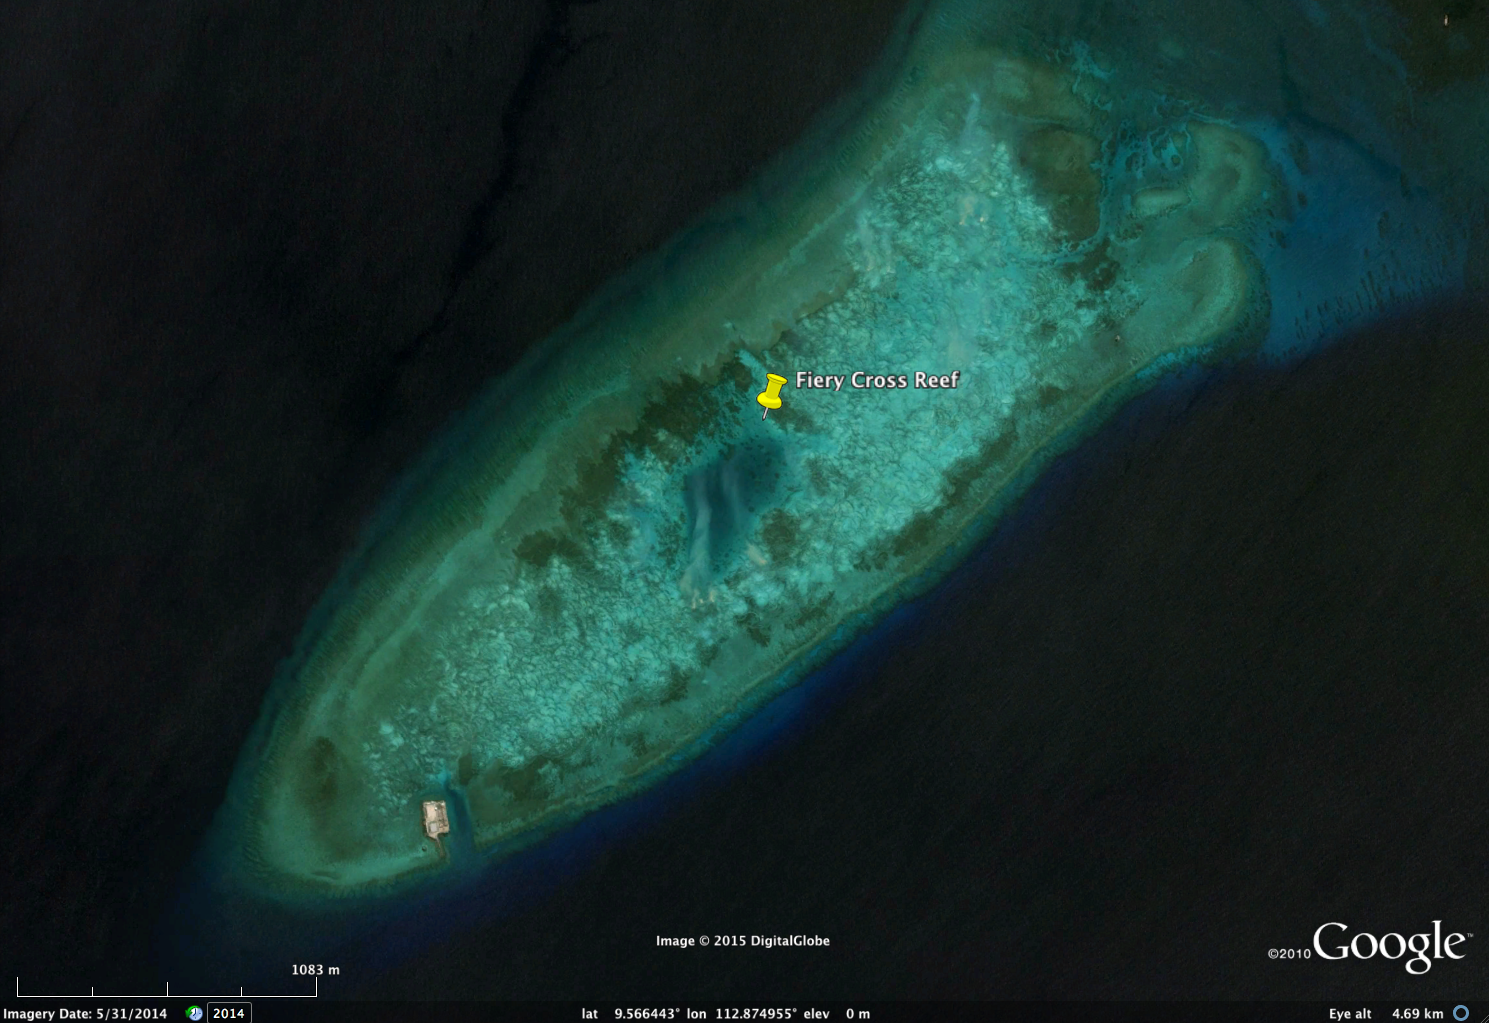  FieryCrossReef, May 31, 2014. Note the only man-made structure (small platform) at the bottom left of island. Light green and light blue areas are coral reef or adjacent habitat. Image copyright DigitalGlobe, via Google. 